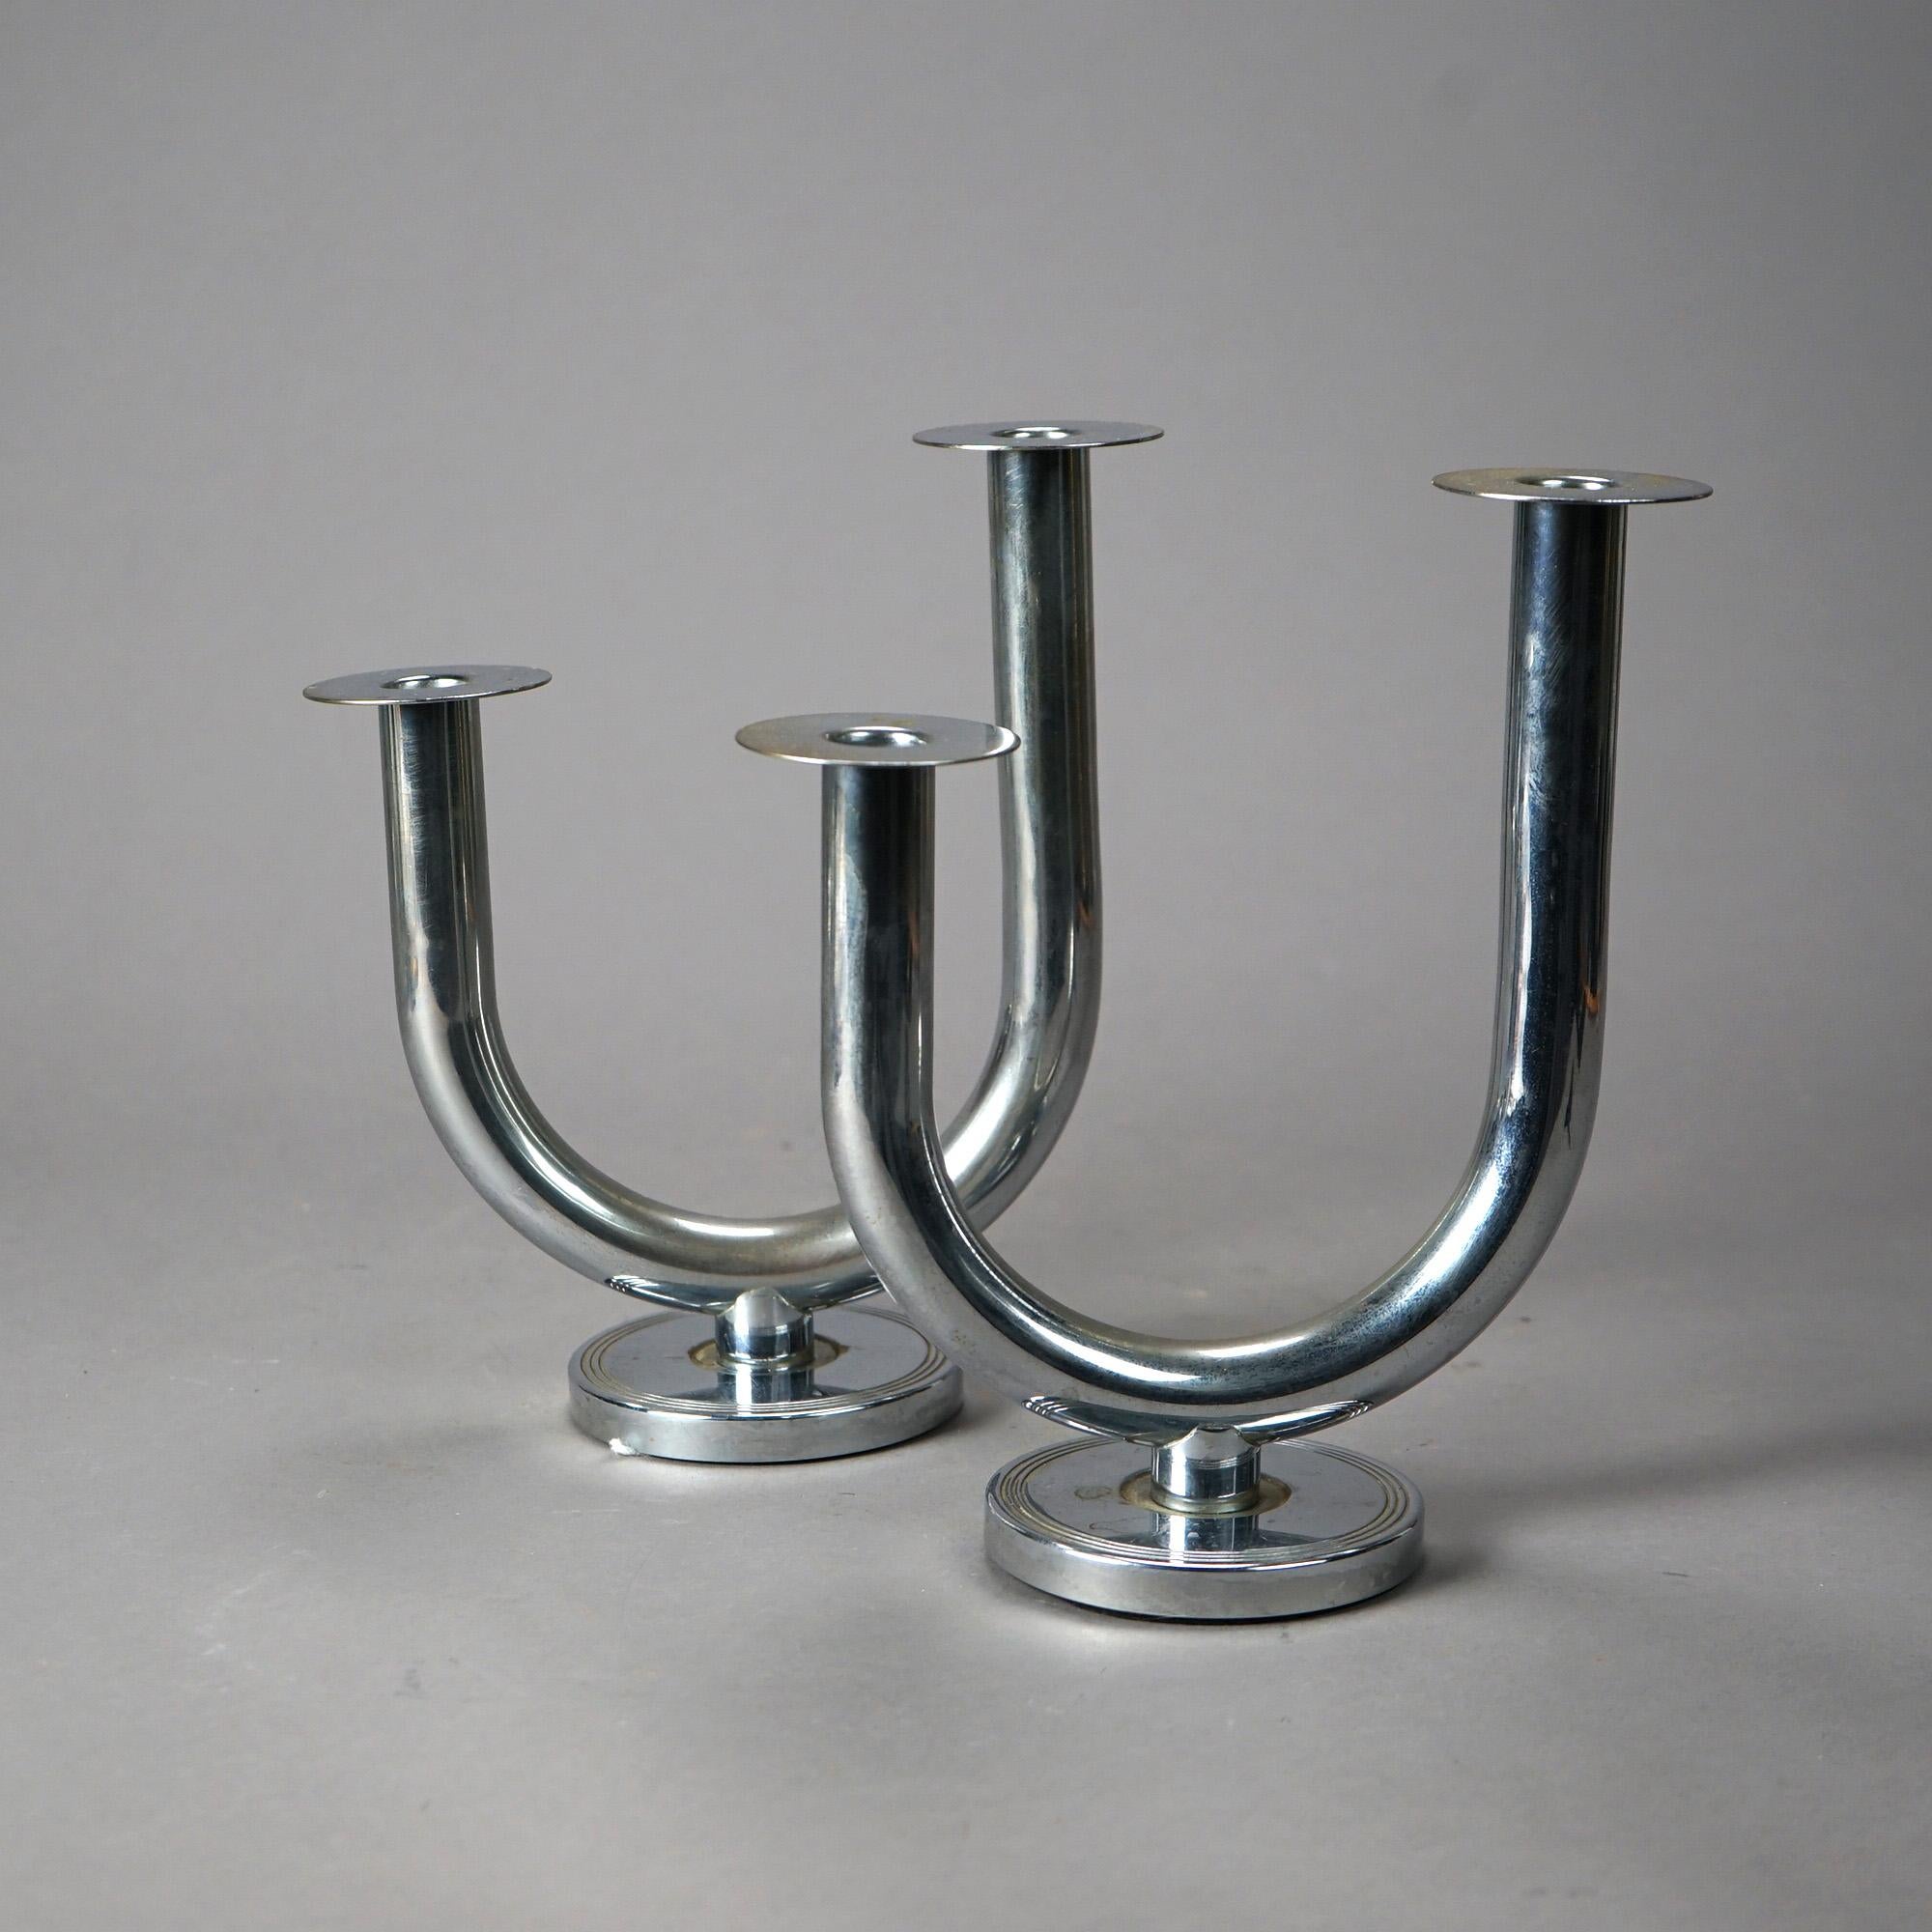 Antique Pair of Art Deco Chrome Candlesticks, Stylized U-Form, Circa 1930 In Good Condition For Sale In Big Flats, NY